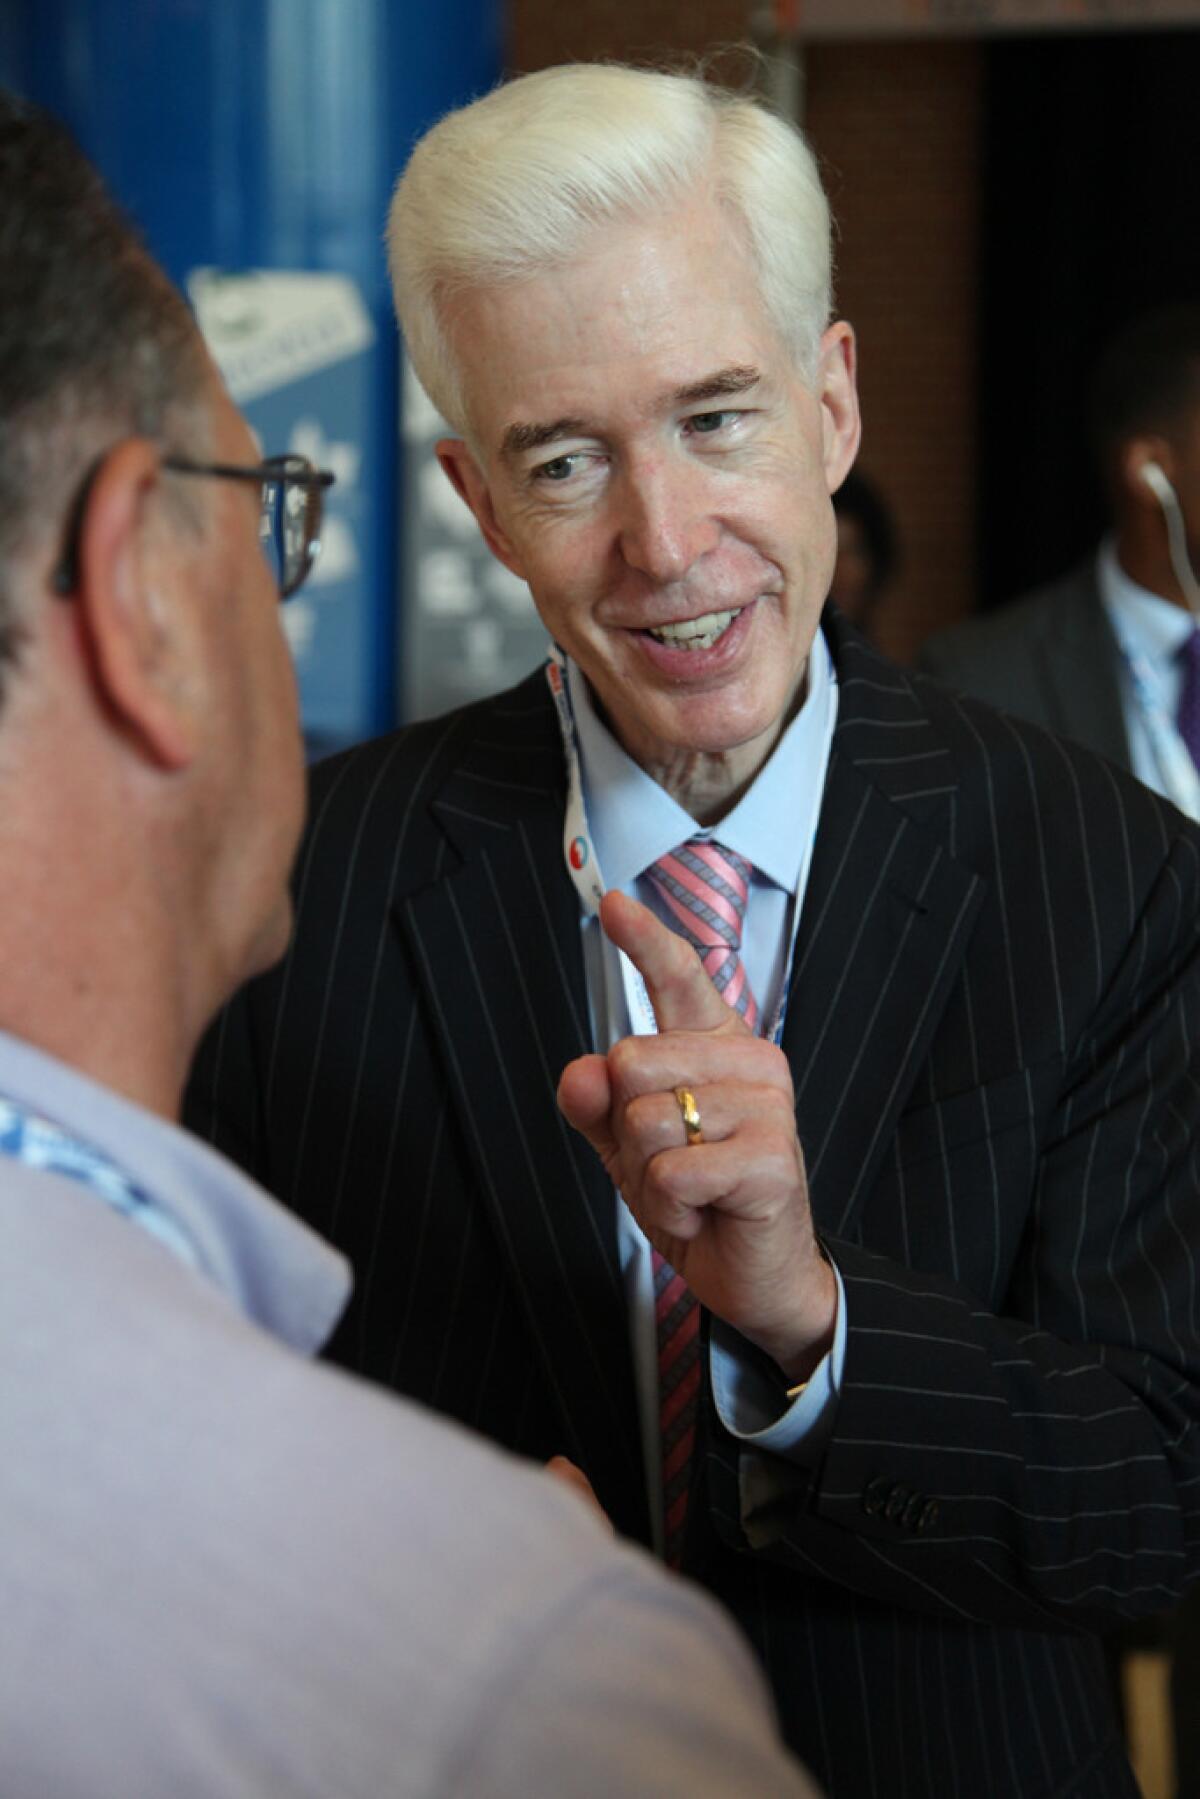 Former California Gov. Gray Davis spoke with admirers in the lobby of the Time Warner Cable Arena, where day 2 of the Democratic National Convention in Charlotte, North Carolina, had just begun.